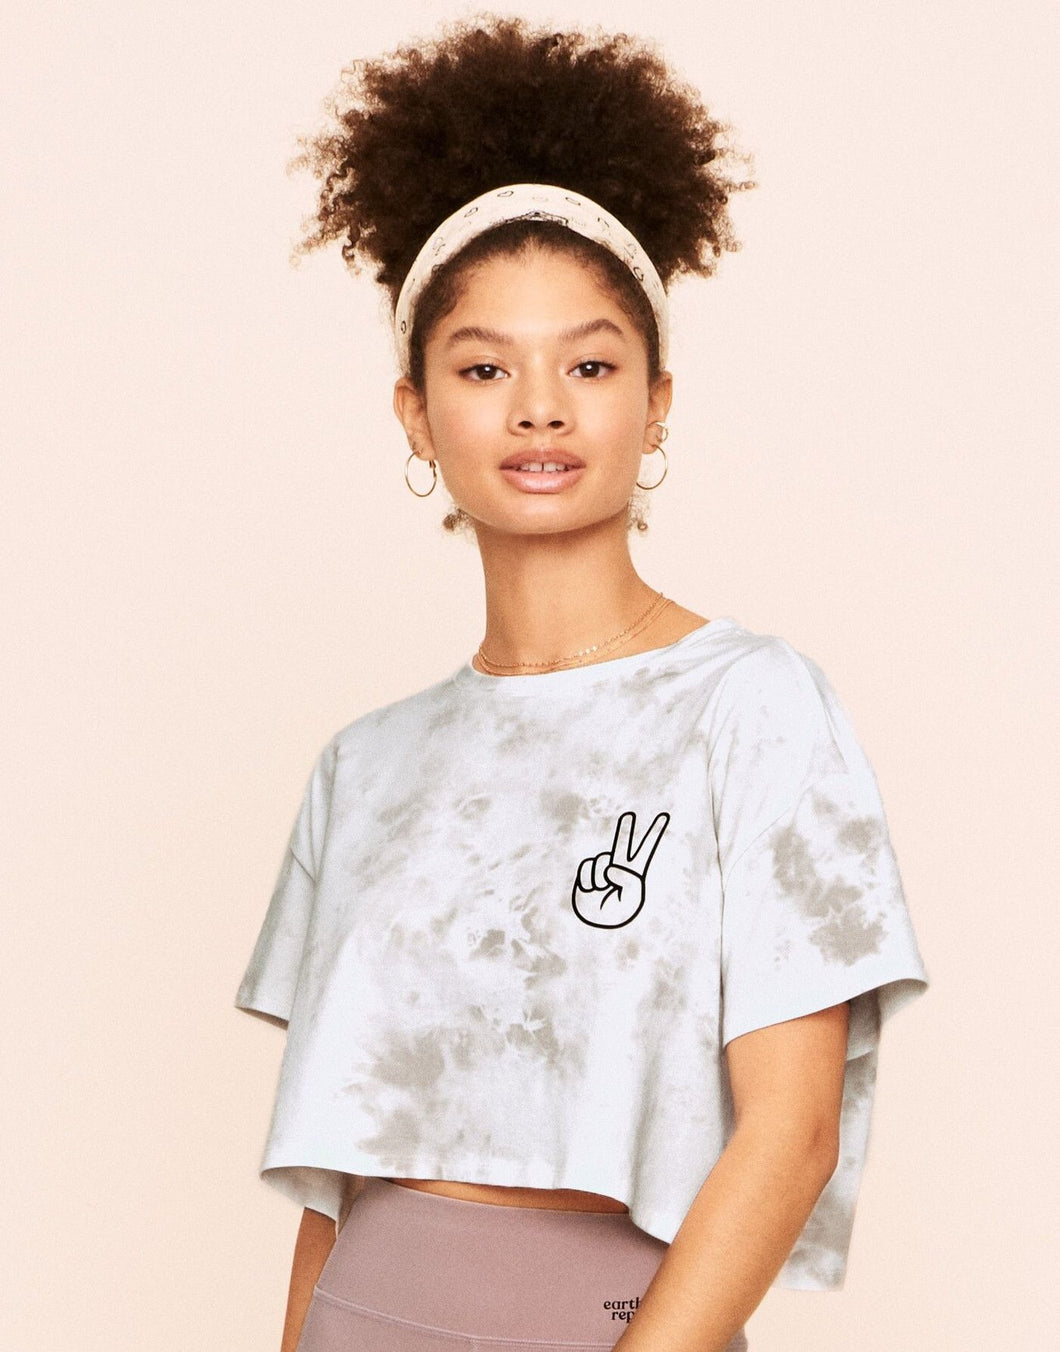 Earth Republic Austyn Cropped Crew Neck Tee Cropped Top in color Tea Stain Print and shape short sleeve tee